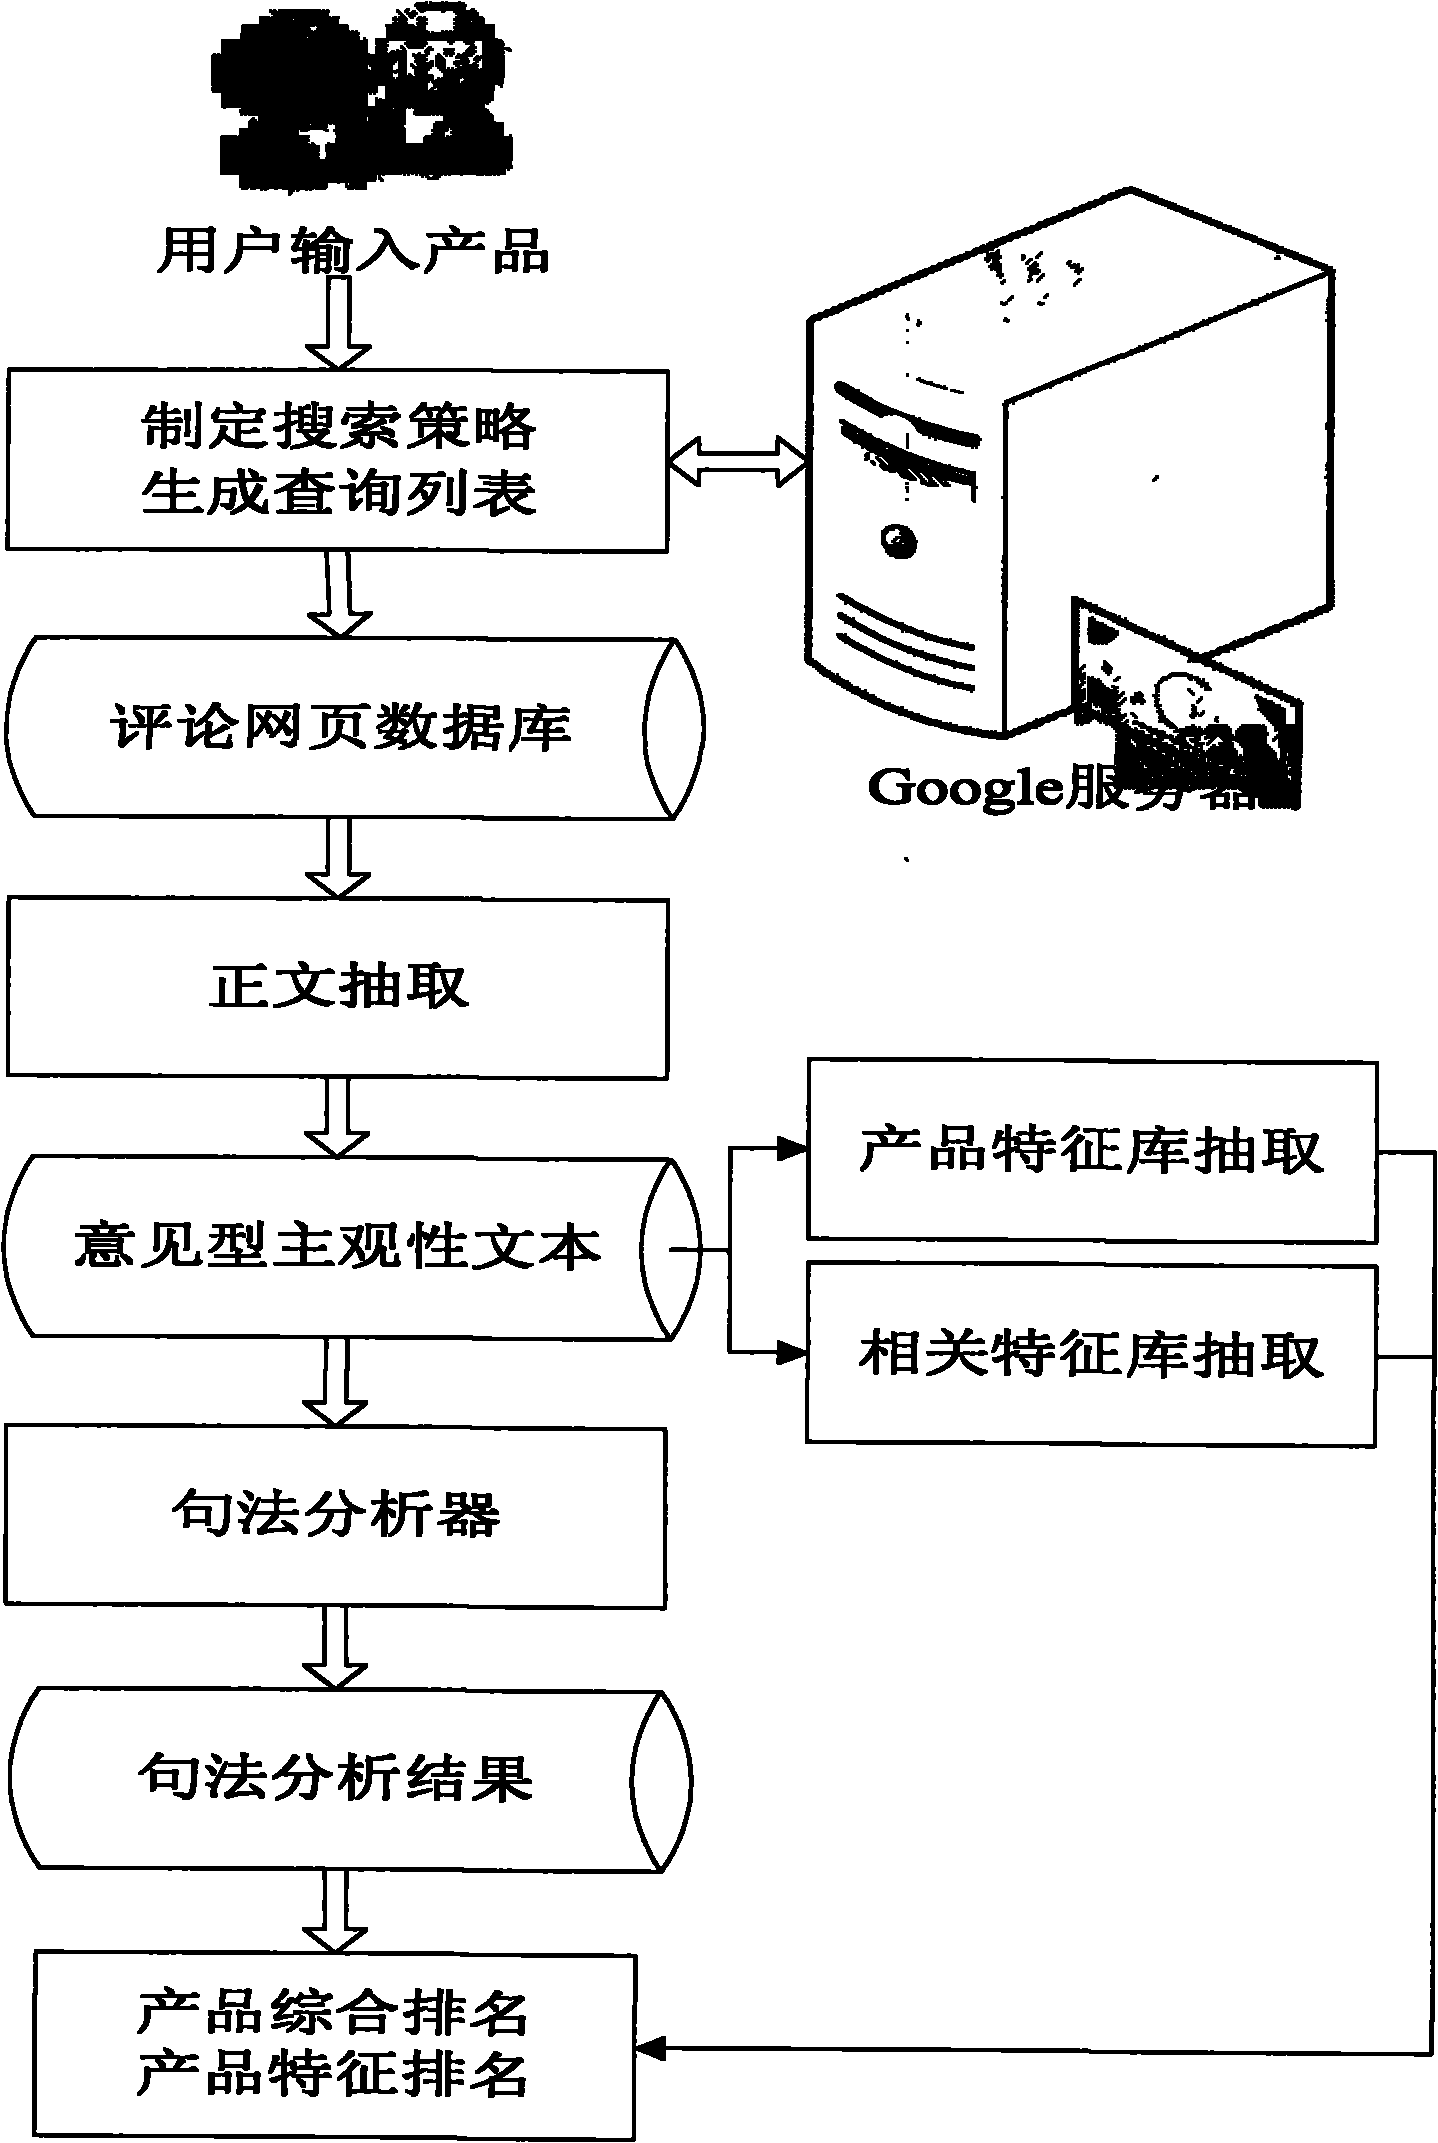 Manufacturer public praise automatic sequencing system based on internet